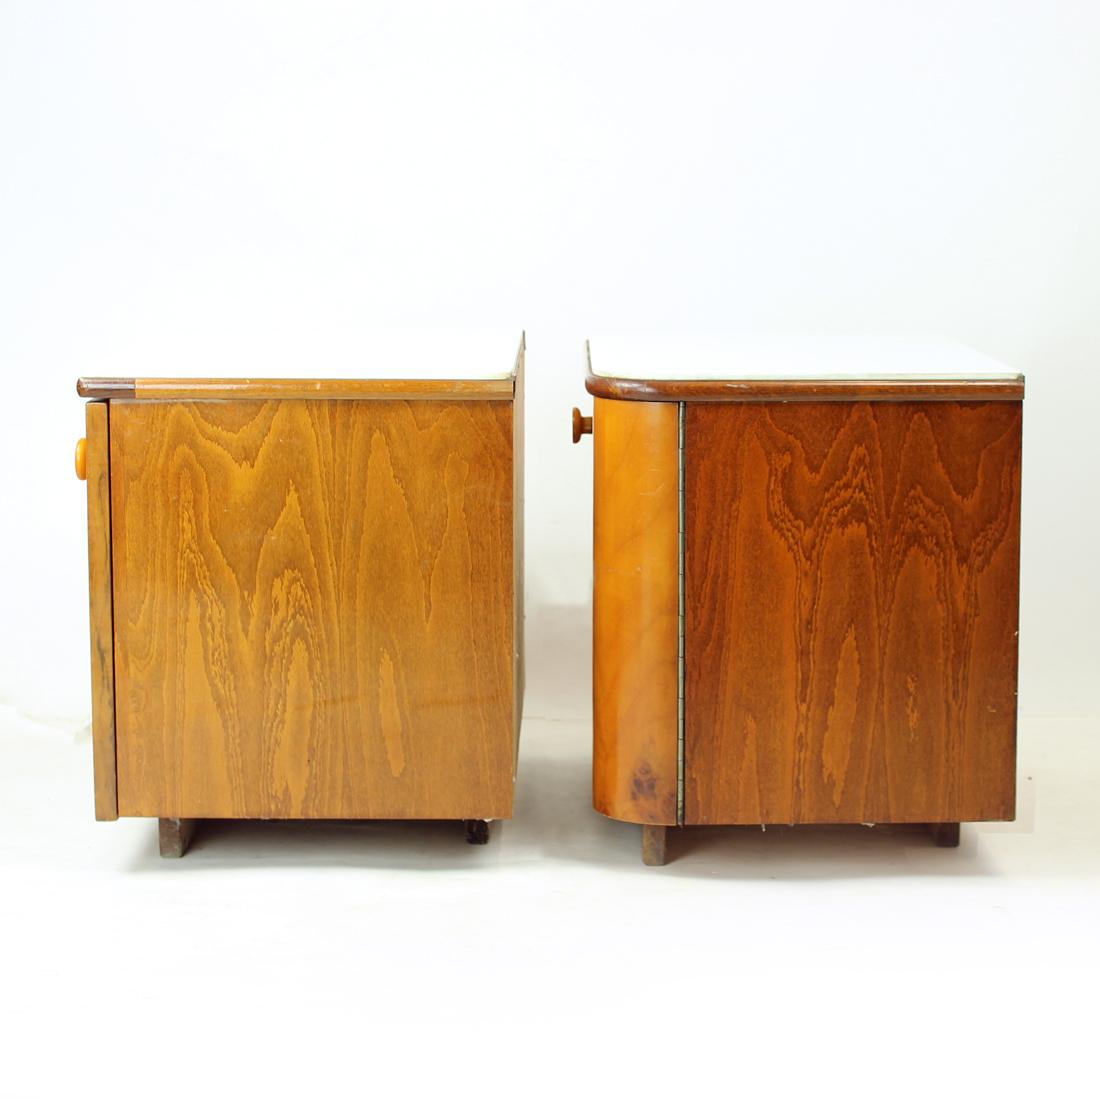 1960s Bedside Tables In Walnut And White Glass, Czechoslovakia For Sale 6